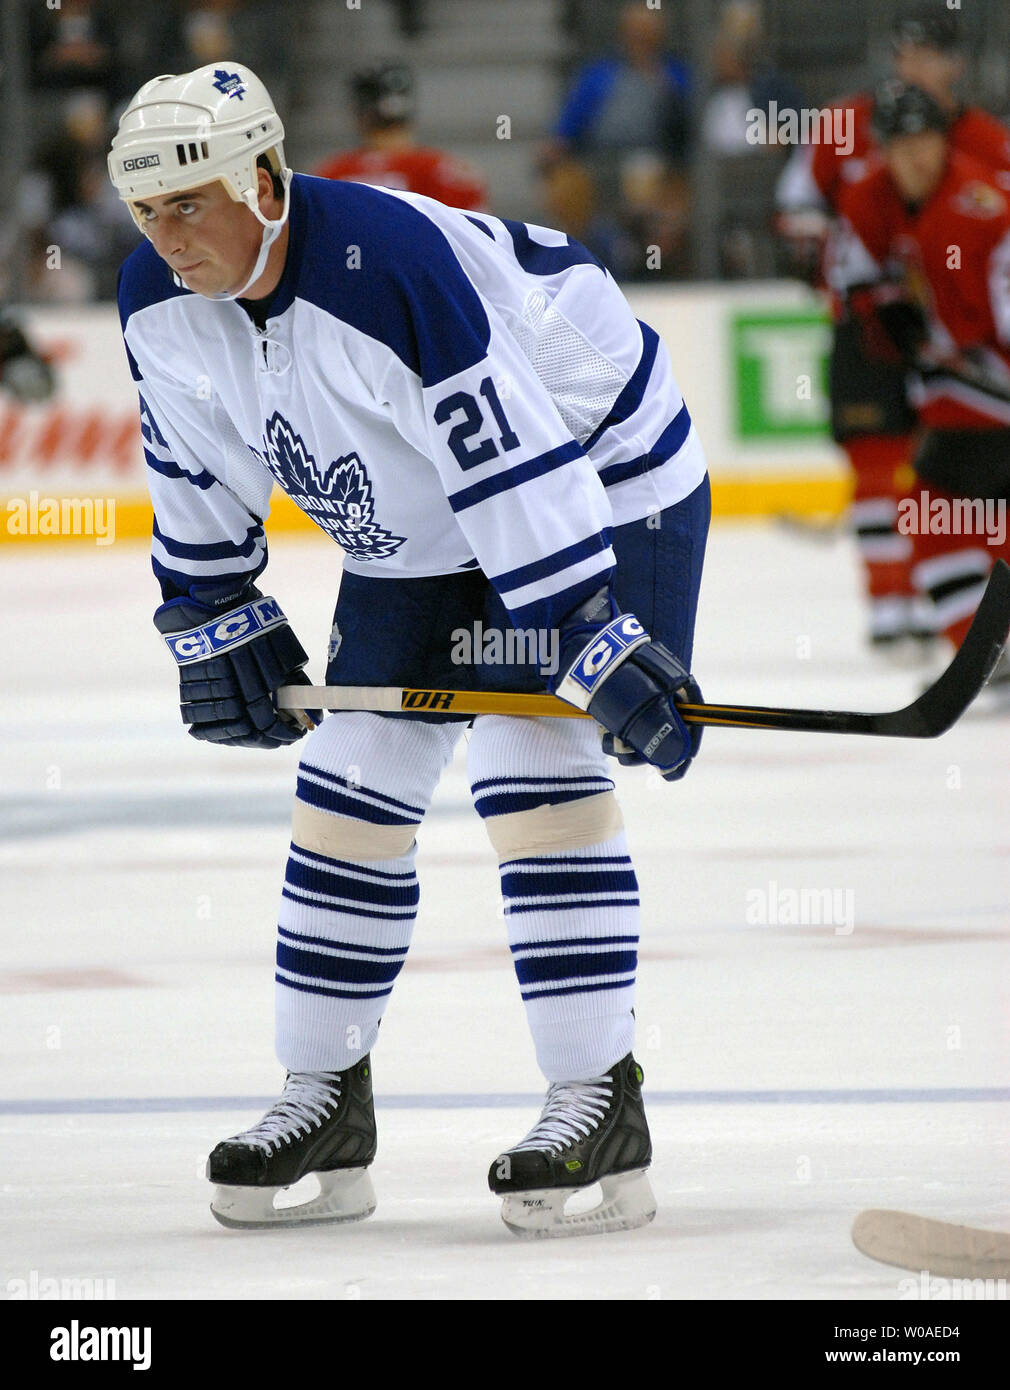 Toronto Maple Leafs honour Börje Salming with patch on jersey